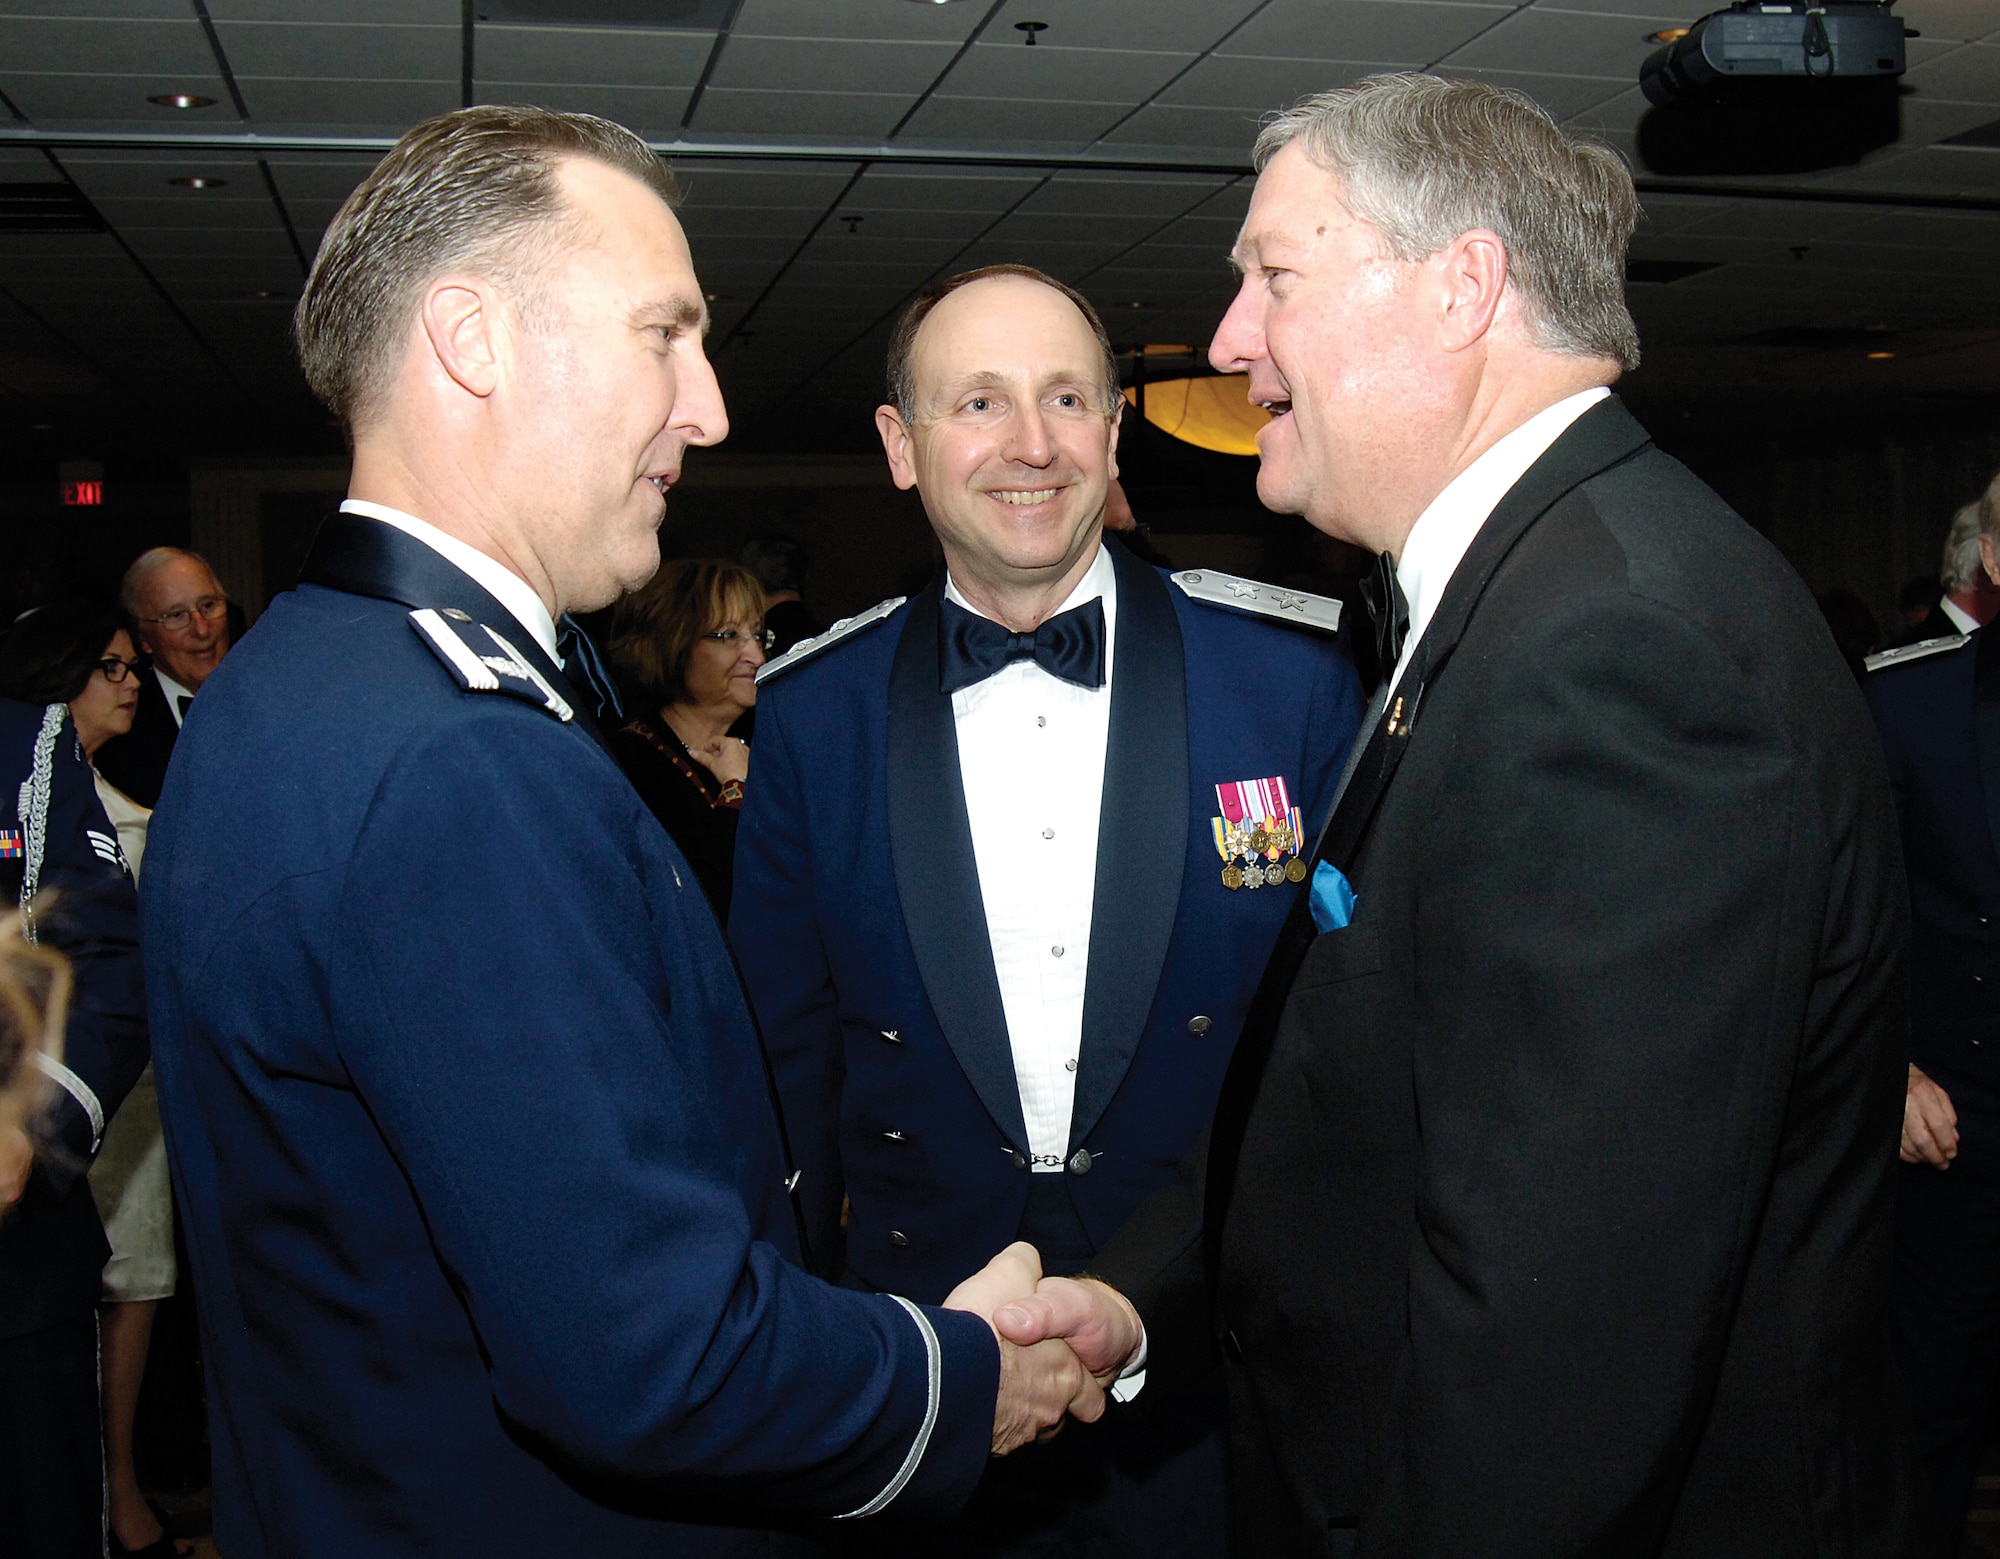 Secretary of the Air Force Michael Donley, right, greets Lt. Col. Rick Johns during the 39th Tinker and Community Dining Out held March 30, on base for a capacity crowd at the Tinker Club. Maj. Gen. Bruce Litchfield, Oklahoma City Air Logistics Center commander, hosted the secretary, who was the featured speaker during the annual event that celebrates the relationship between the base and surrounding community. Colonel Johns, the 72nd Air Base Wing’s Mission Support Group deputy commander, served as “Mr. Vice” during the Dining Out. (Air Force photo by Margo Wright)